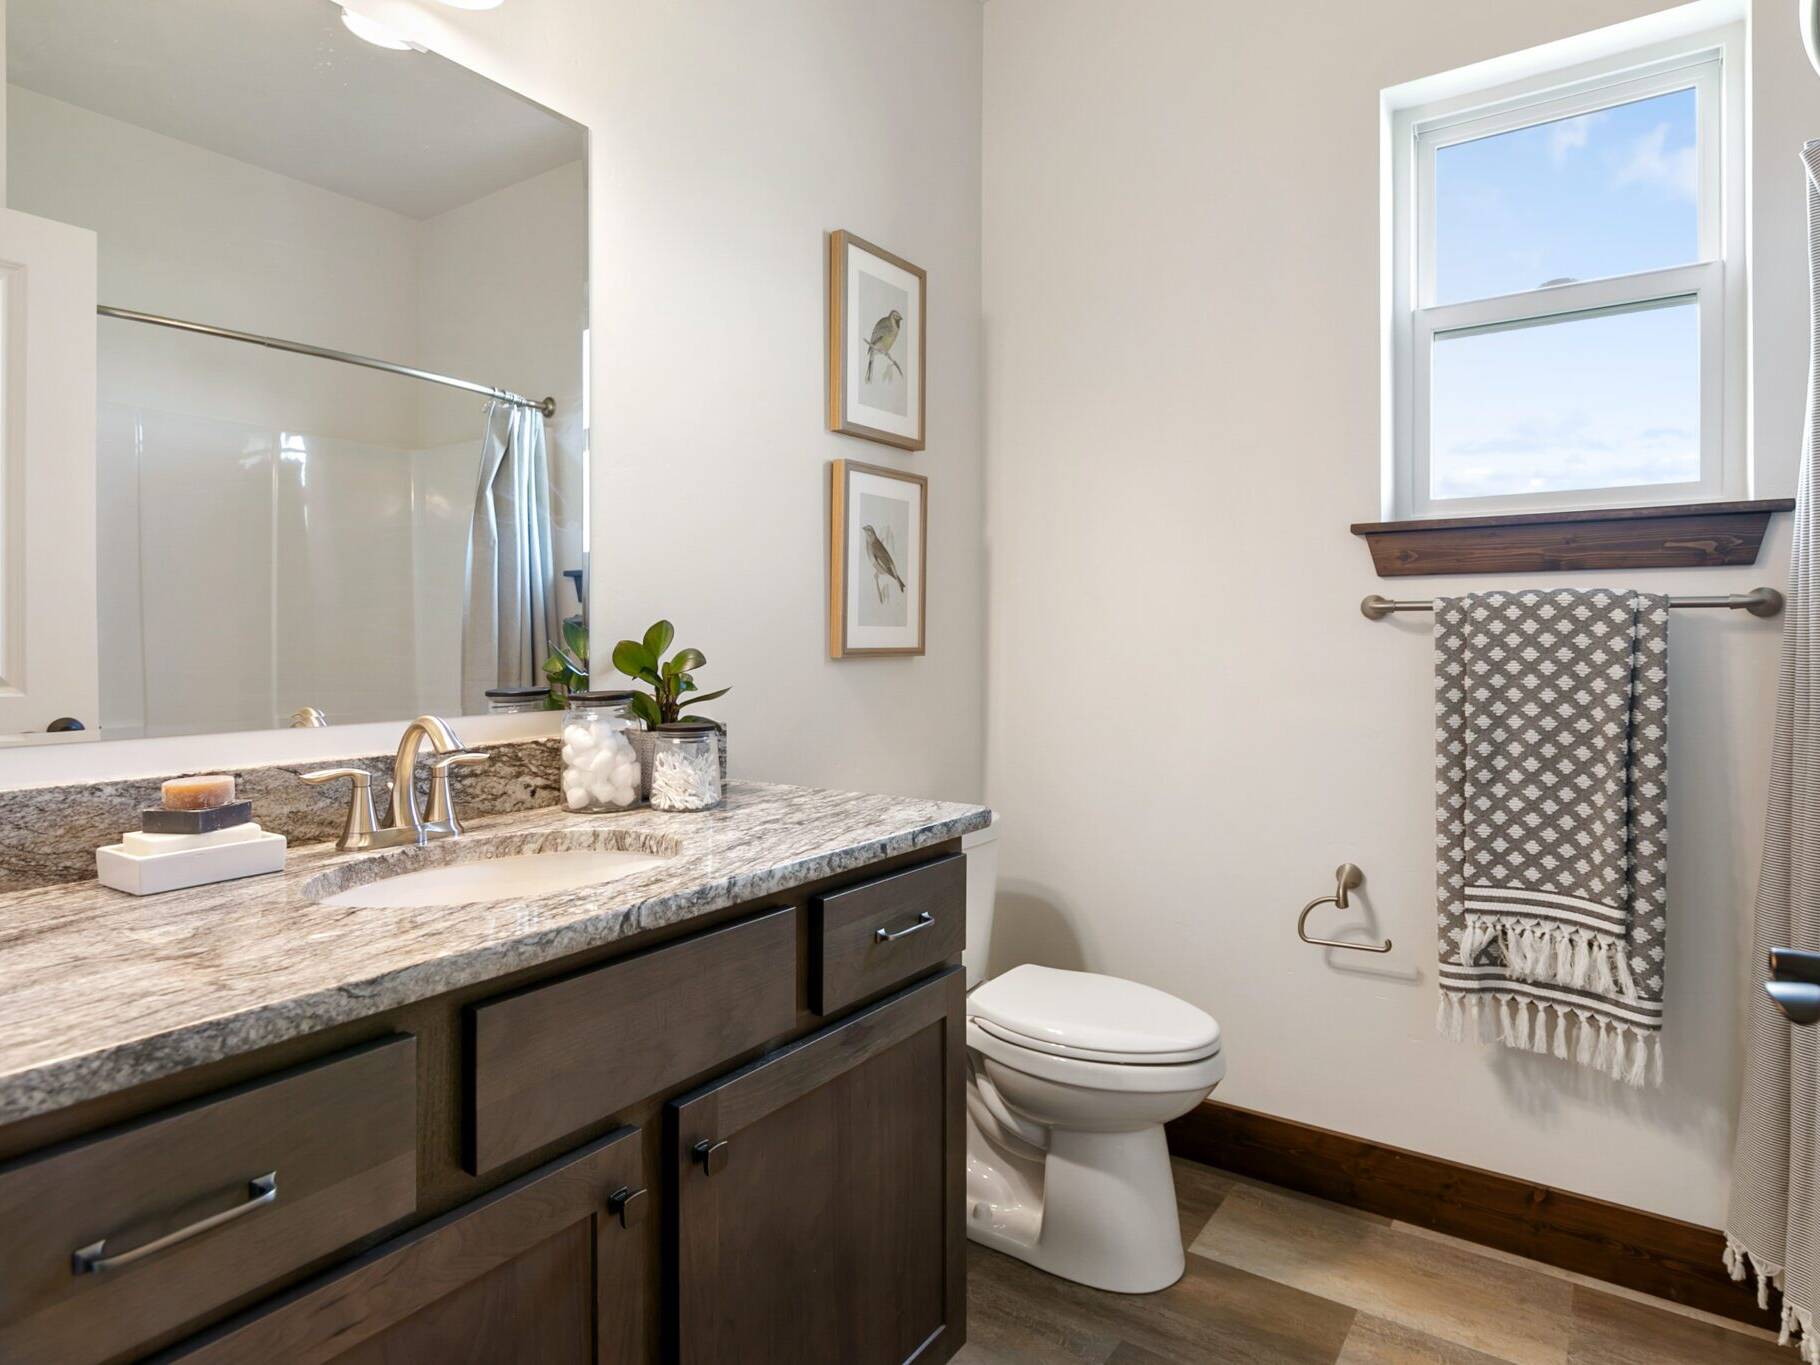 Guest bathroom in The Seeley model home - Built by Big Sky Builder in Hamilton, MT